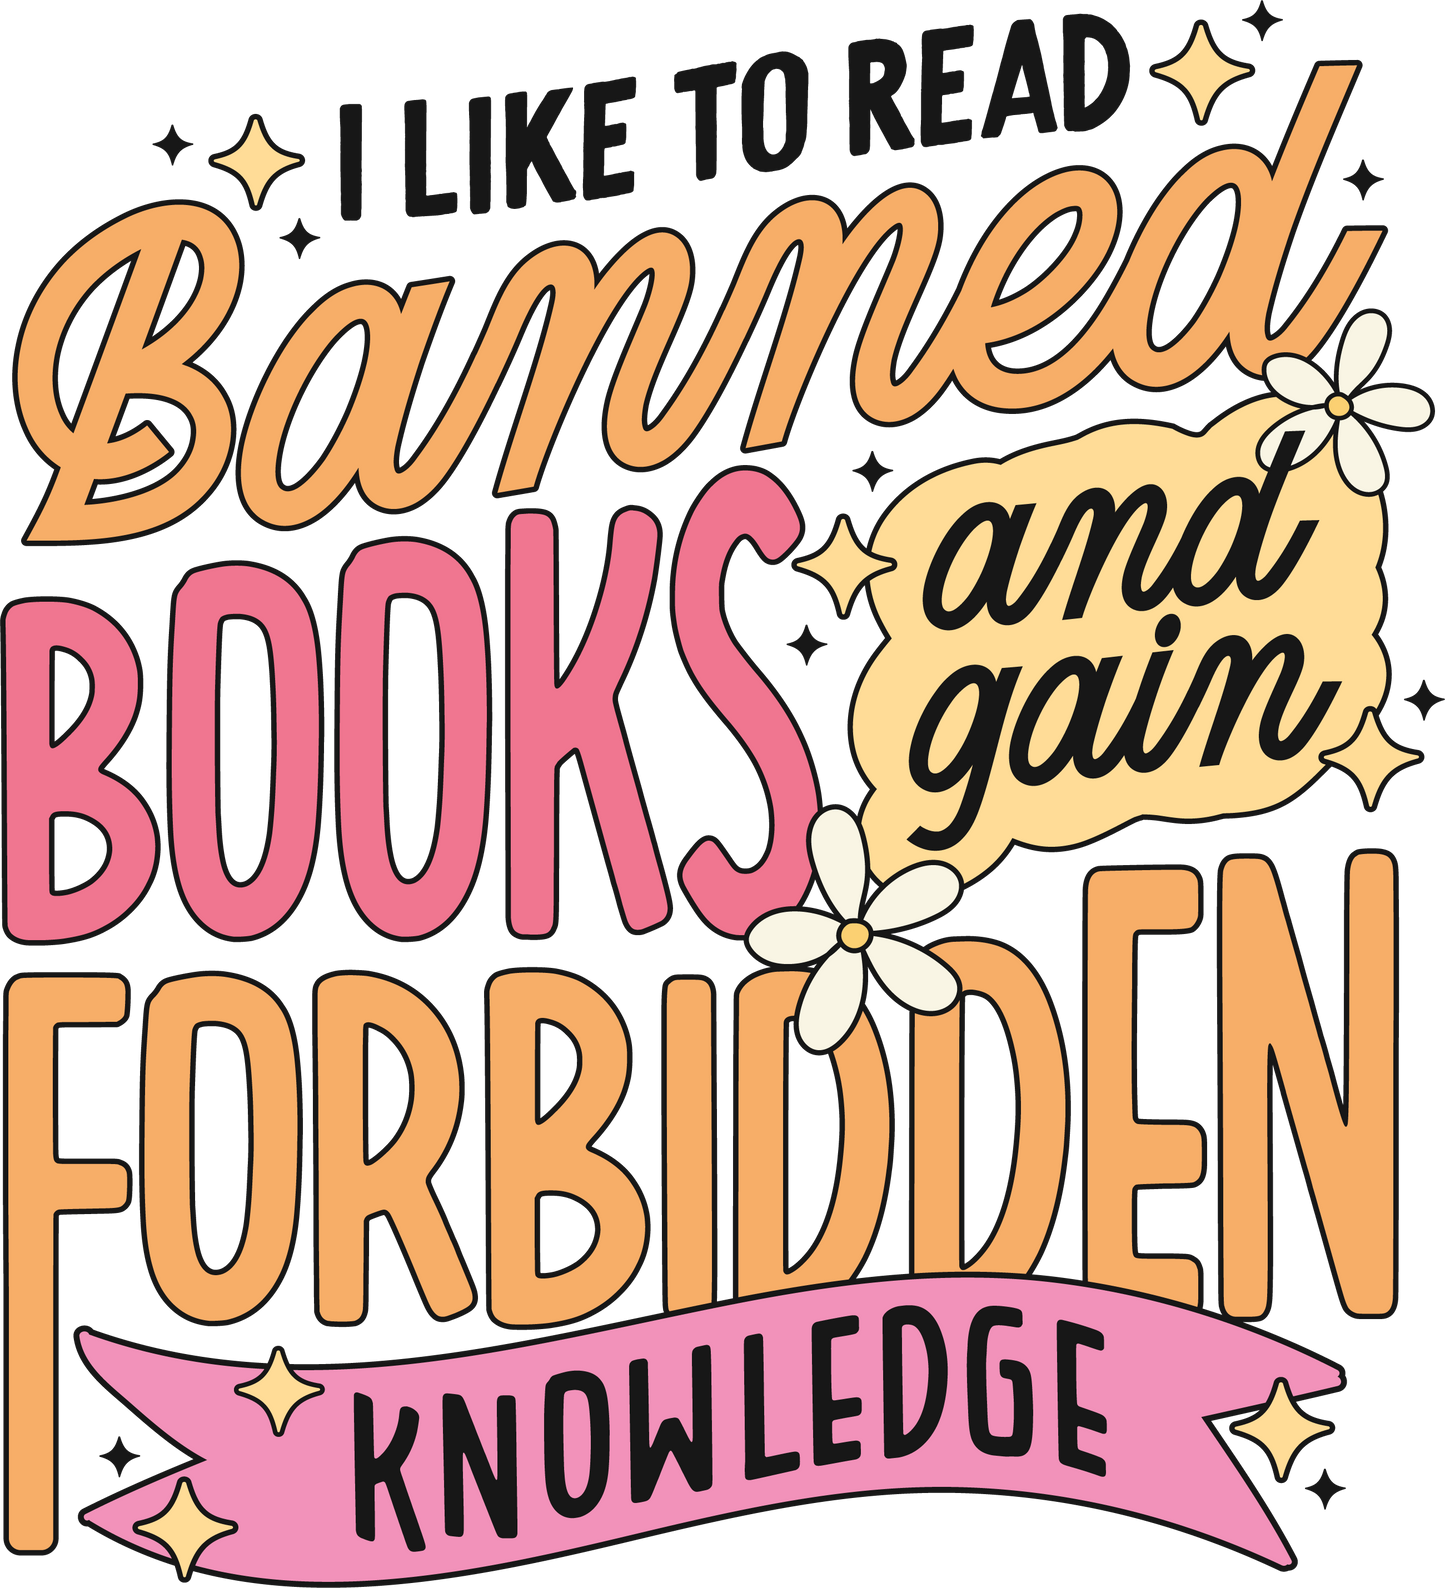 Banned Books and Forbidden Knowledge Sticker